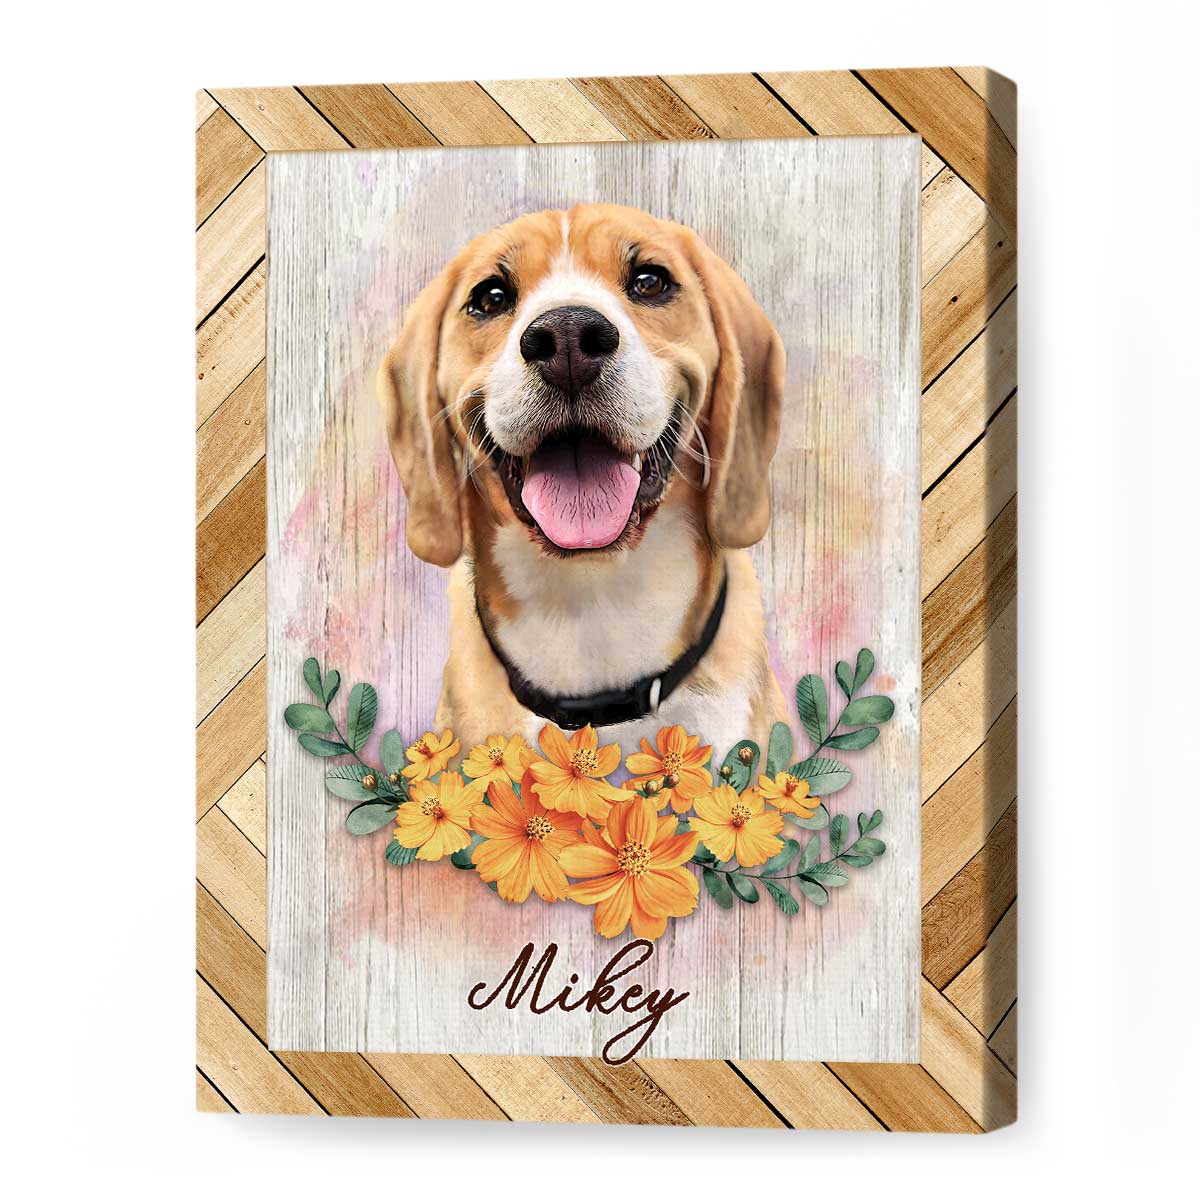 Custom Pet Portrait Canvas, Gifts For Dog Lovers, Pet Portrait With Yellow Flowers, Pet Memorials - Best Personalized Gifts for Everyone